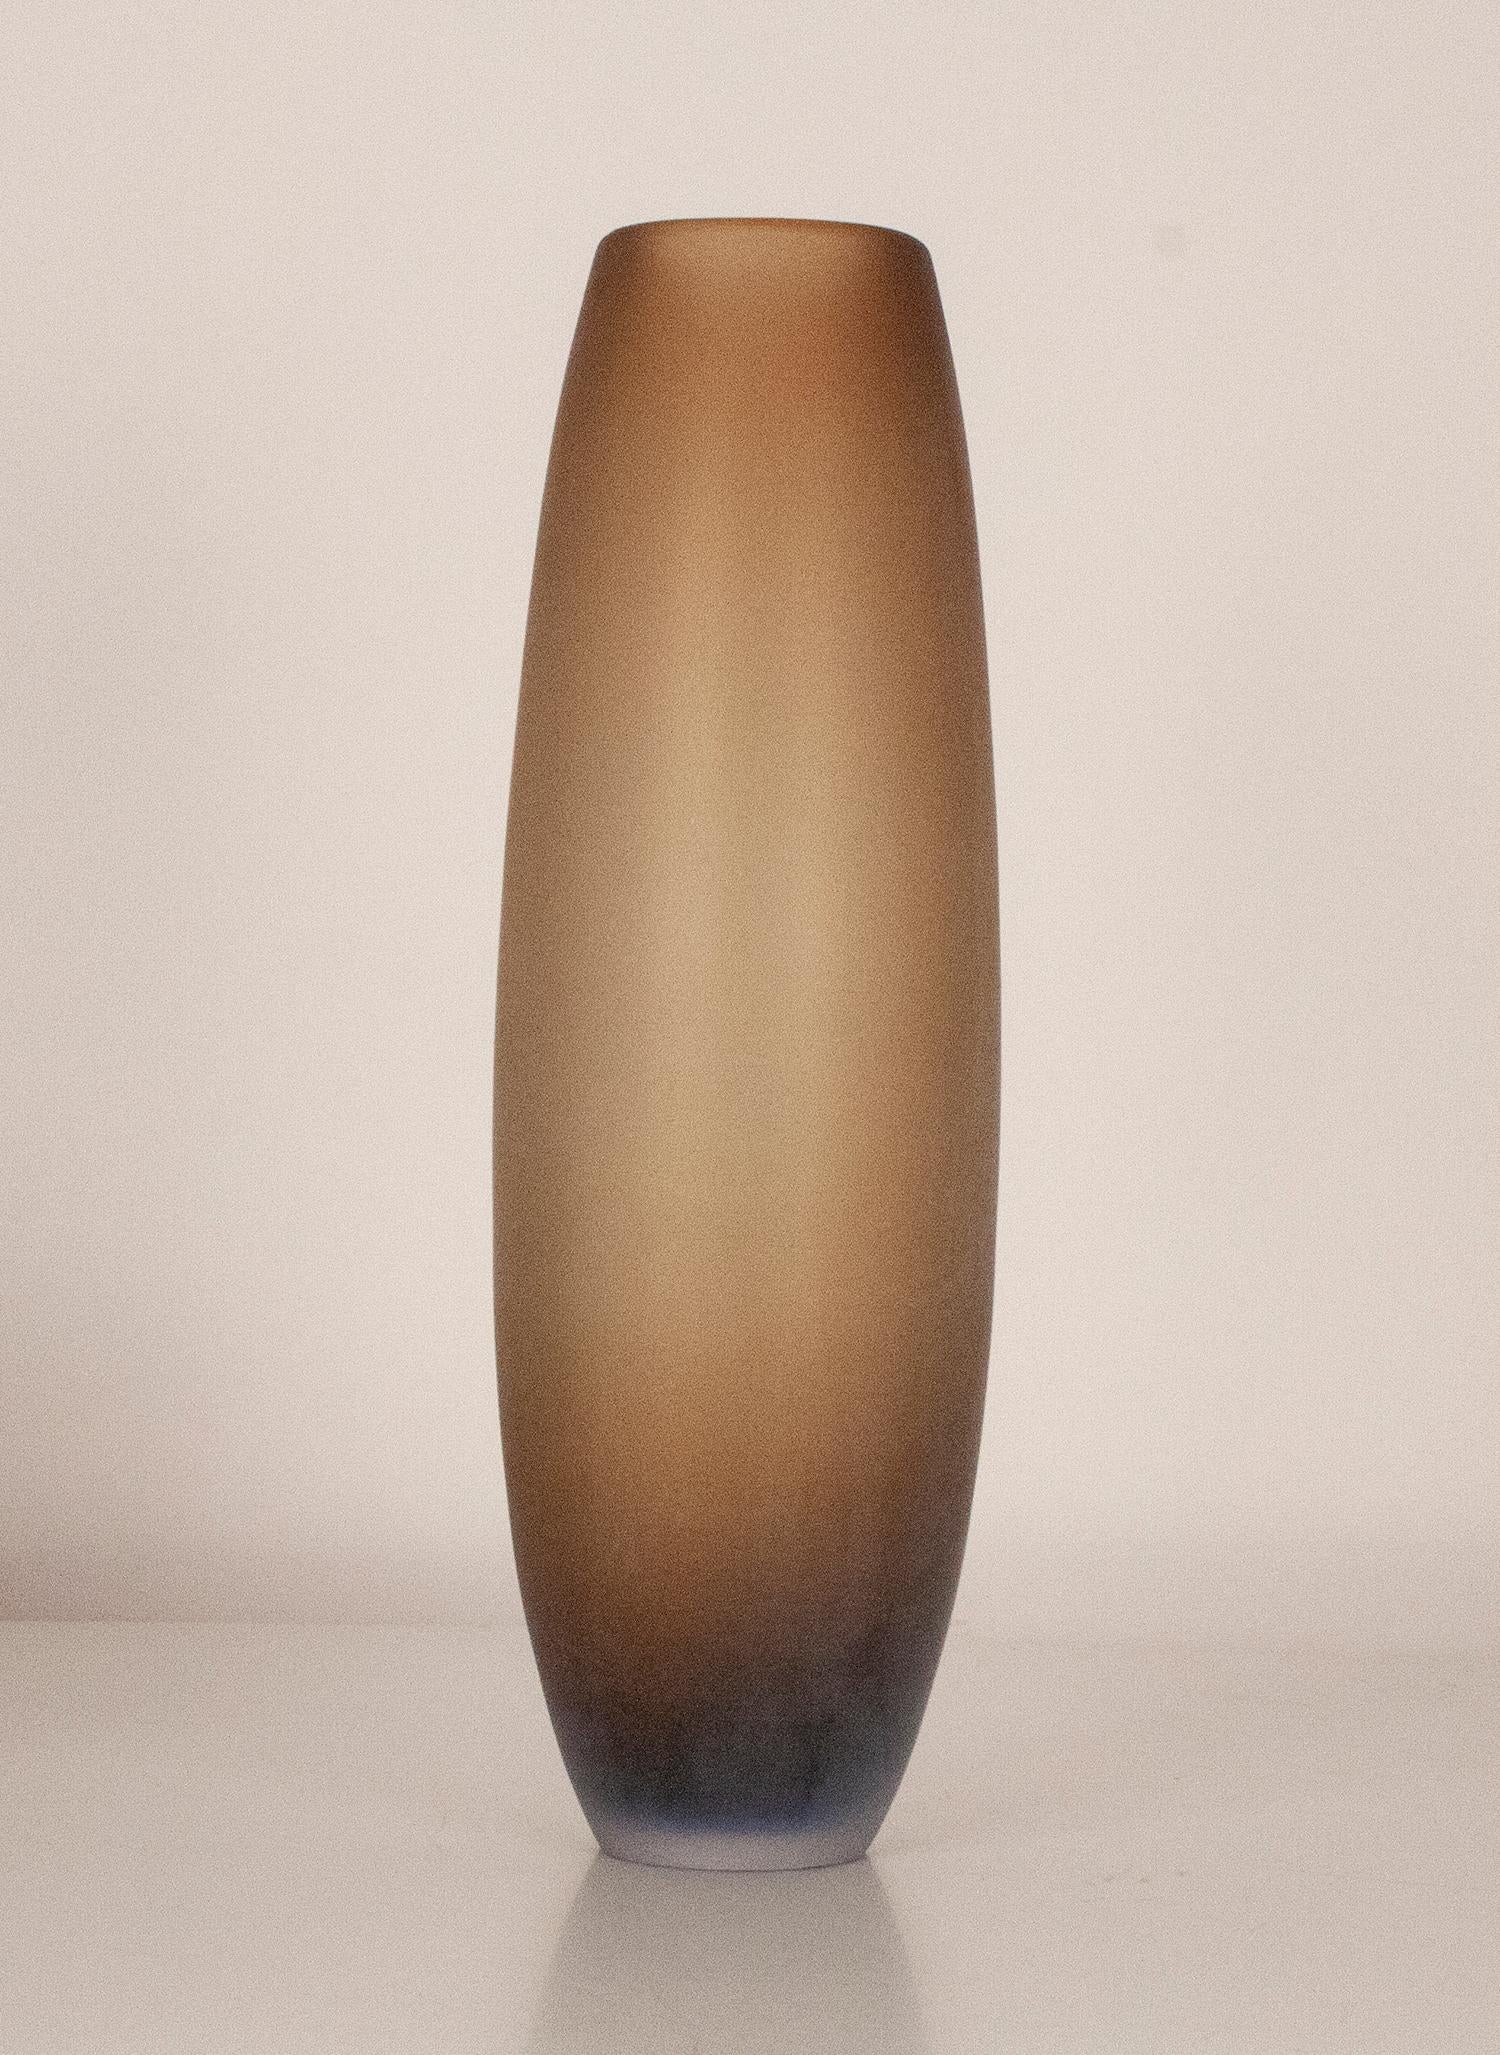 Arcade Opachi.
Rare signed murano glass hand blown by Ivan Baj, Opaco vase, Italy.
Limited Edition. Circa 1992.